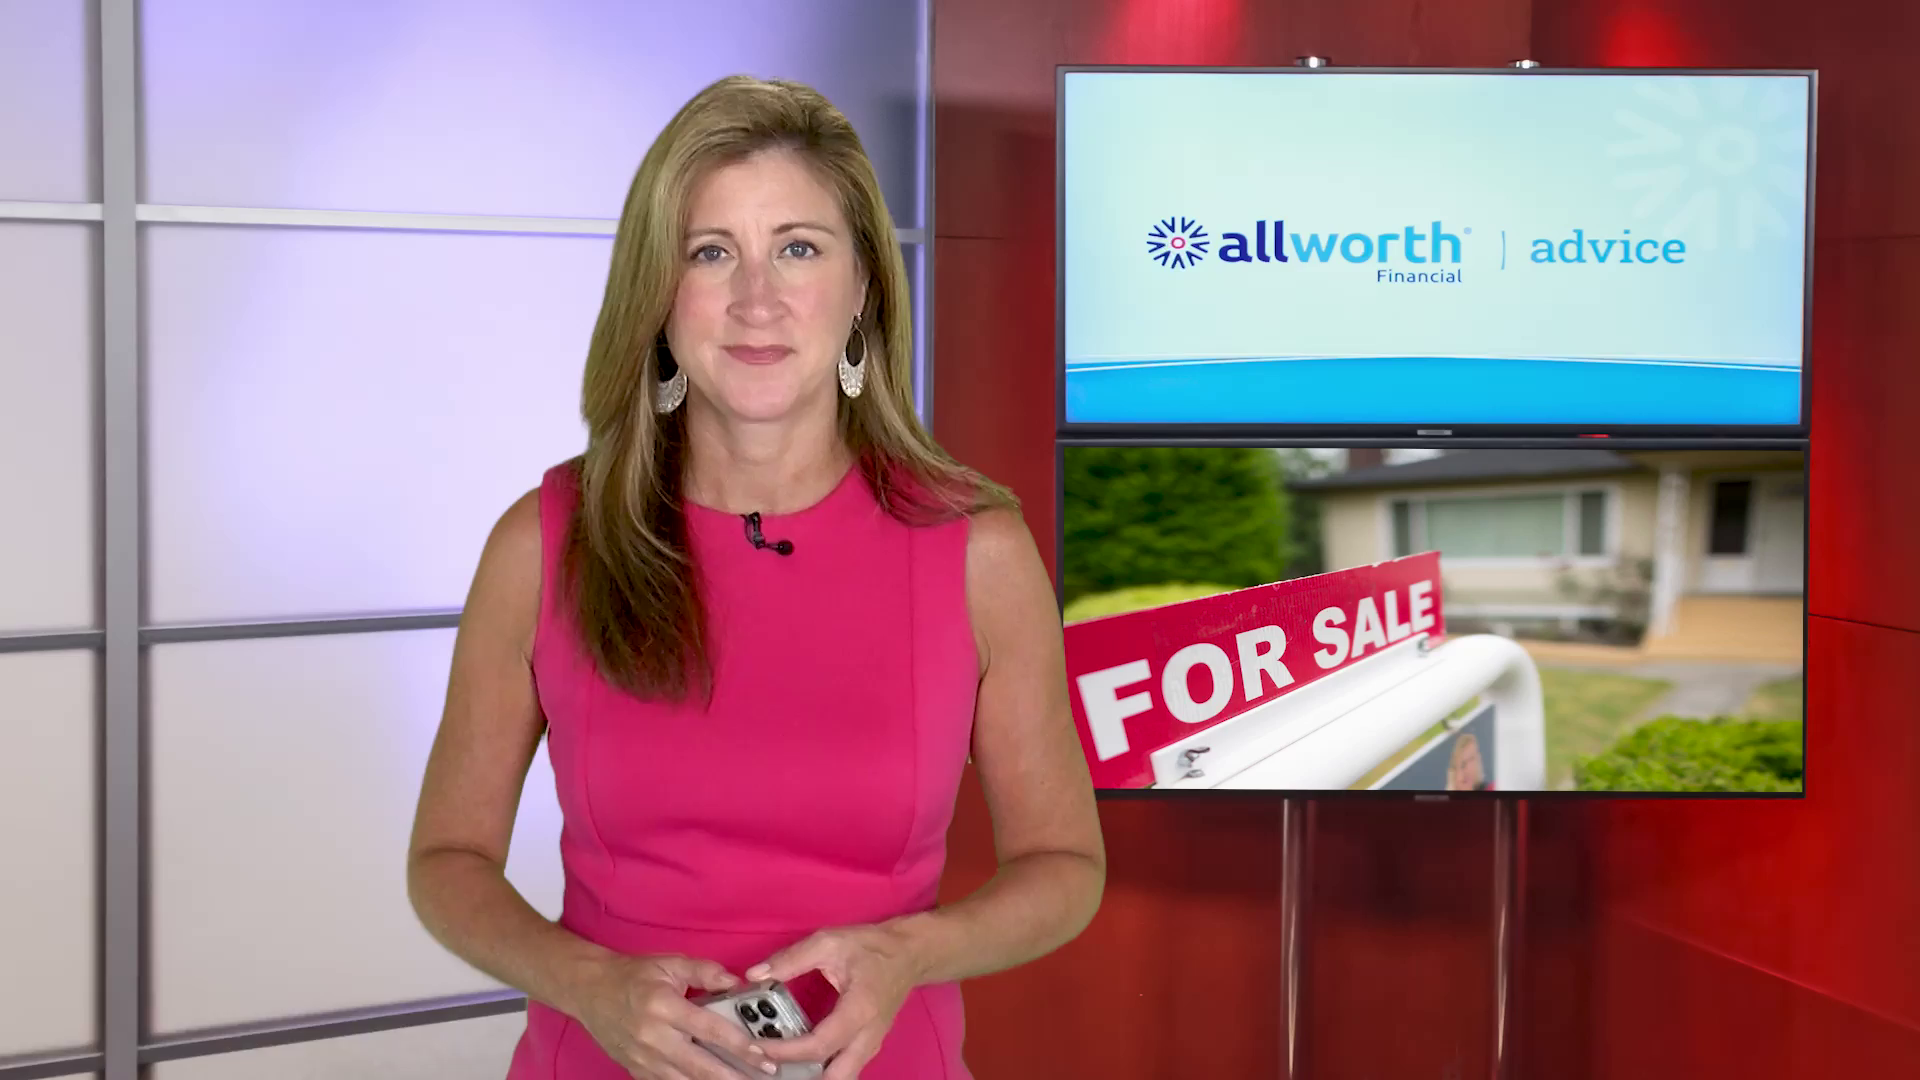 Allworth Advice: More people buying new homes